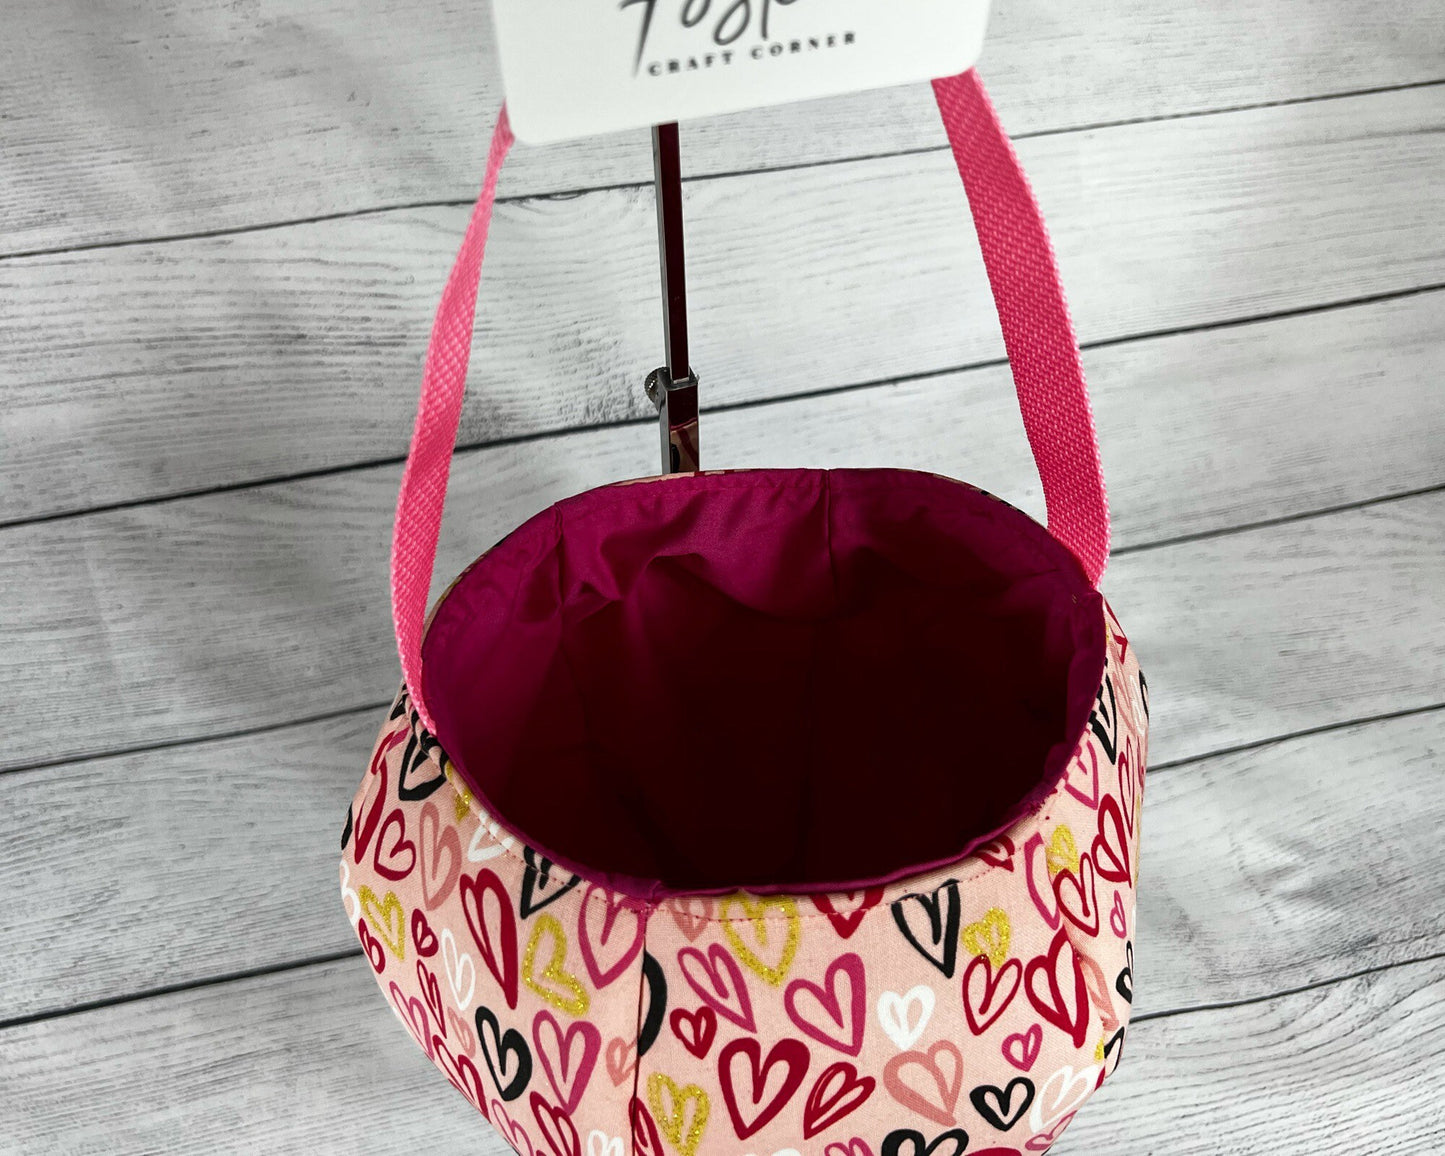 Red and Pink Heart Tote Bag - Hearts - Patter - Gold Glitter - Fun - Multi-Colored - Everyday - Holiday - Easter - Halloween - Party - Gift